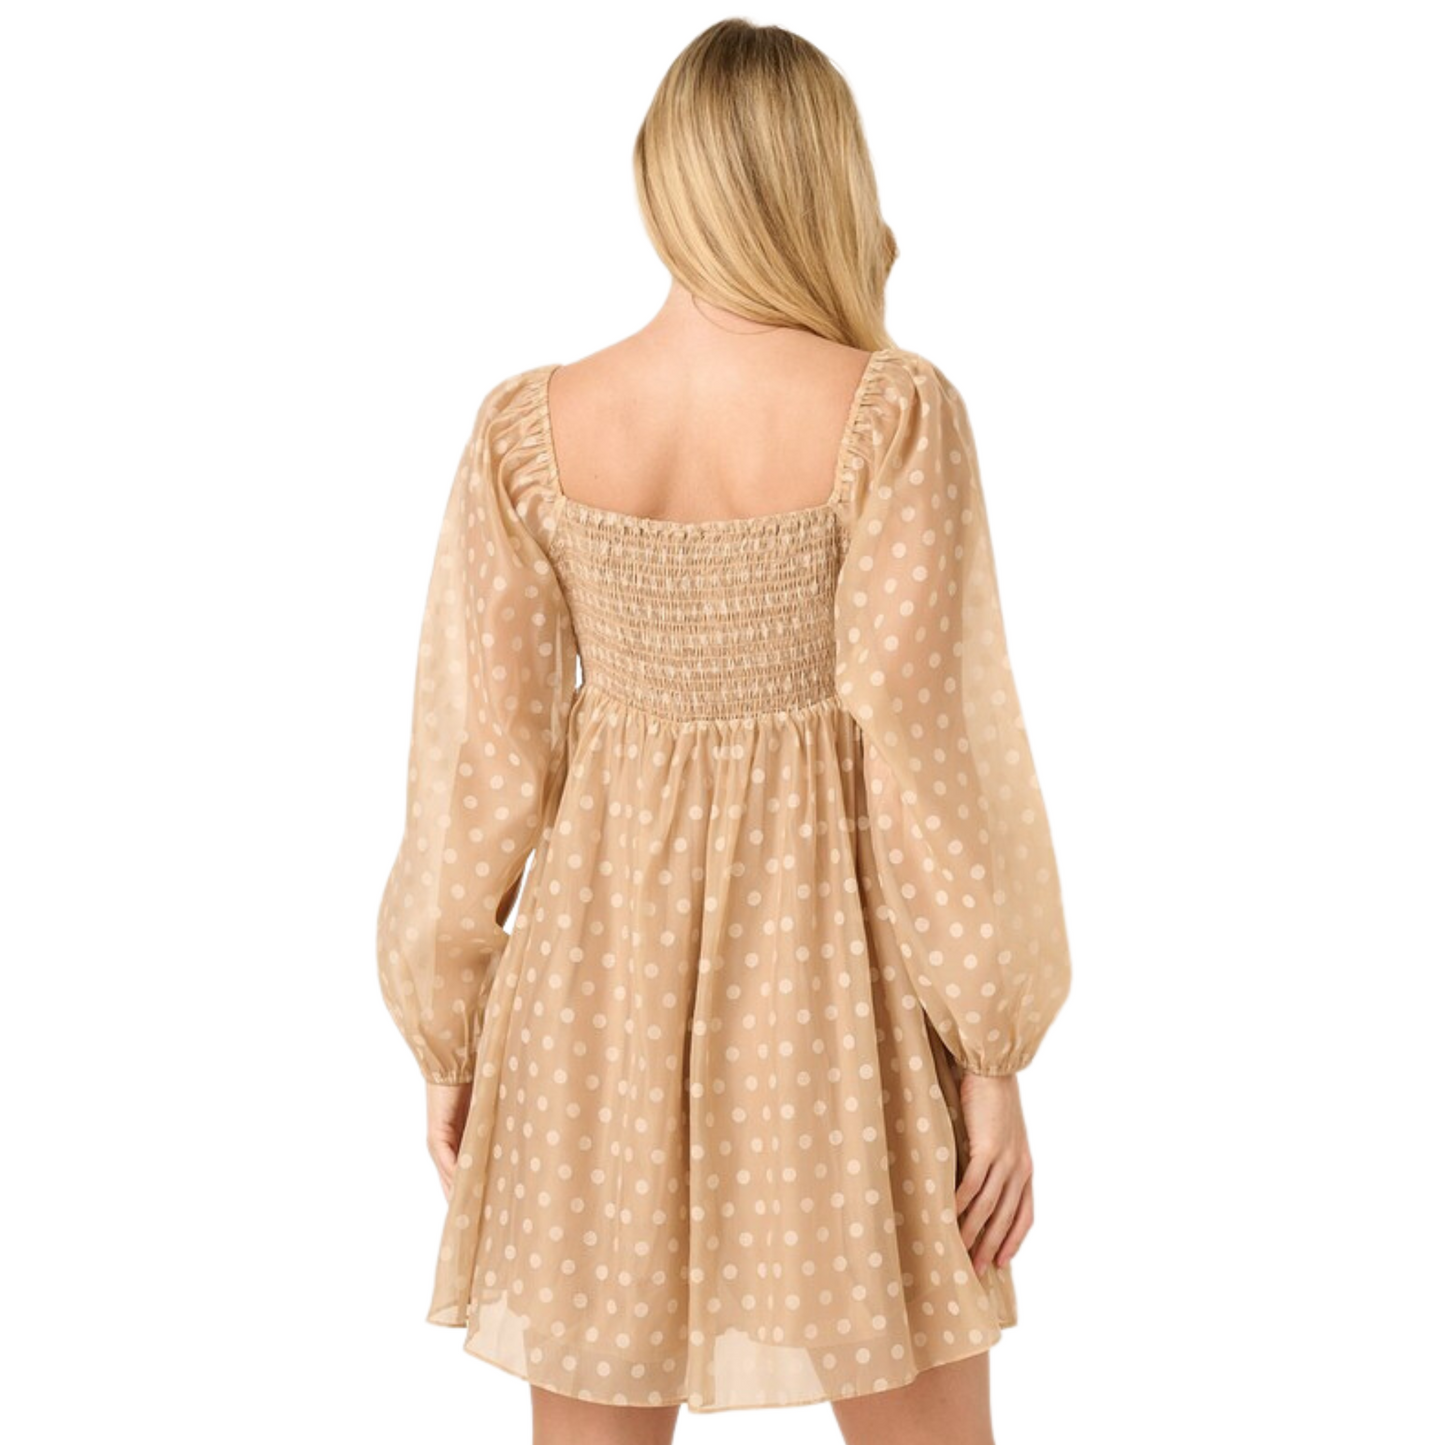 Look sharp in this Dot Jacquard Babydoll dress, crafted with a organza woven fabric. The dress features a princess neckline, long sleeves, ruching detail on the yoke, and a mini length. The sophisticated mocha color creates a timeless, yet stylish ensemble you'll want to wear over and over.